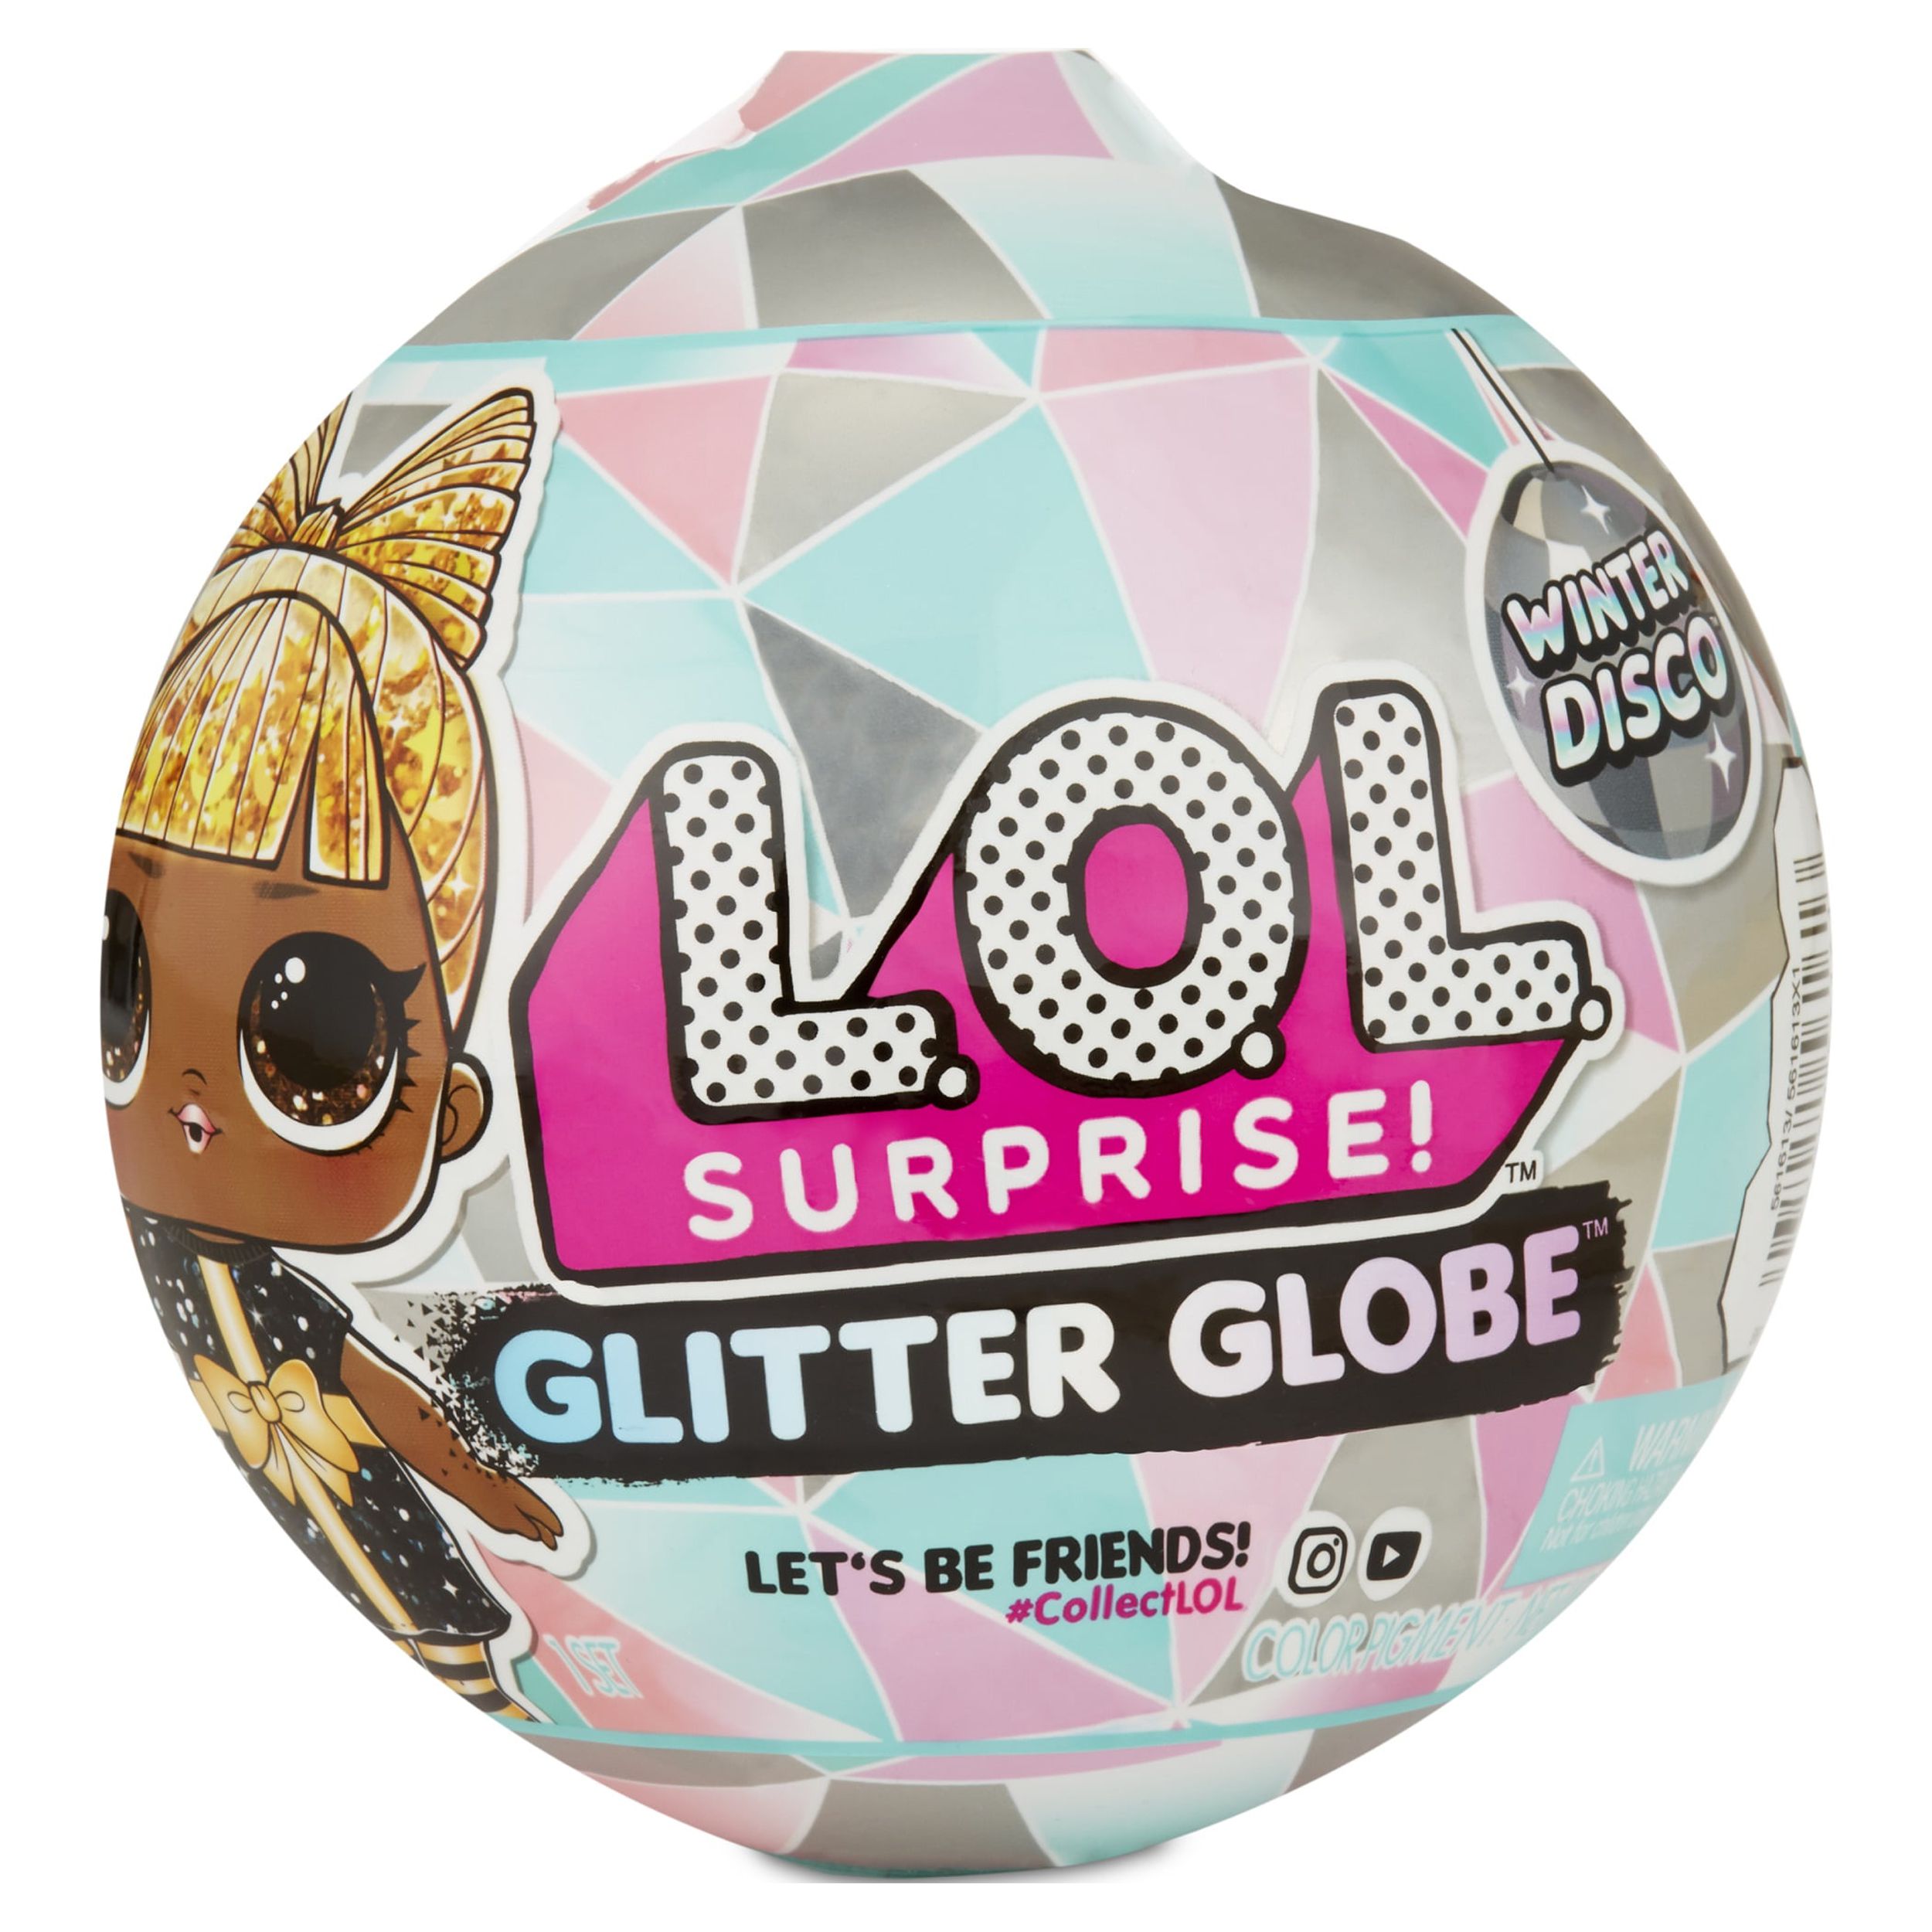 LOL Surprise Glitter Globe Doll Winter Disco Series, Great Gift for Kids Ages 4 5 6+ - image 1 of 6